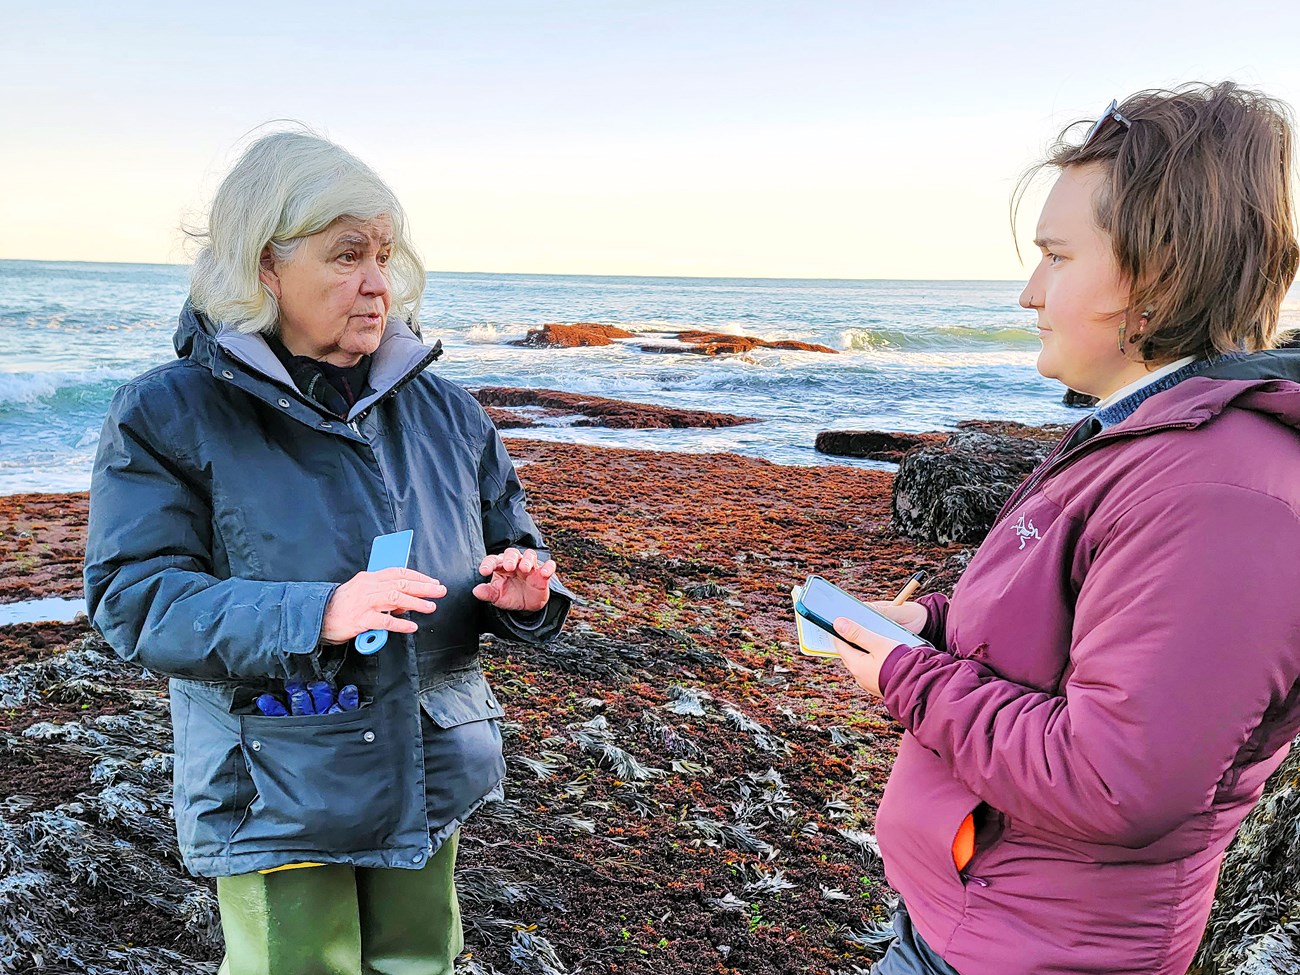 Older woman in green hip boots speaking to a younger woman holding a pad, pen, and cellphone. They're outside on a rocky, algae-covered stretch of coastline with the ocean behind them.